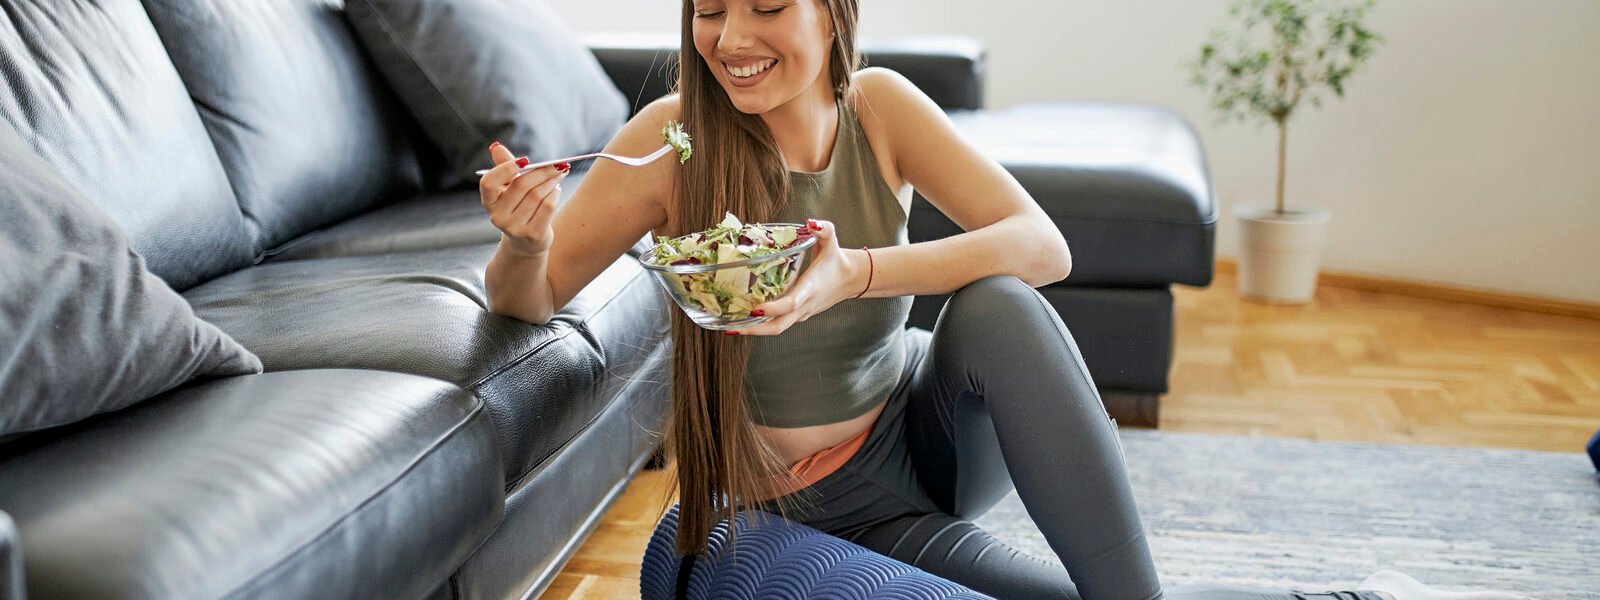 Eating Salad Every Day Has An Unexpected Effect On Your Muscles - Health Digest